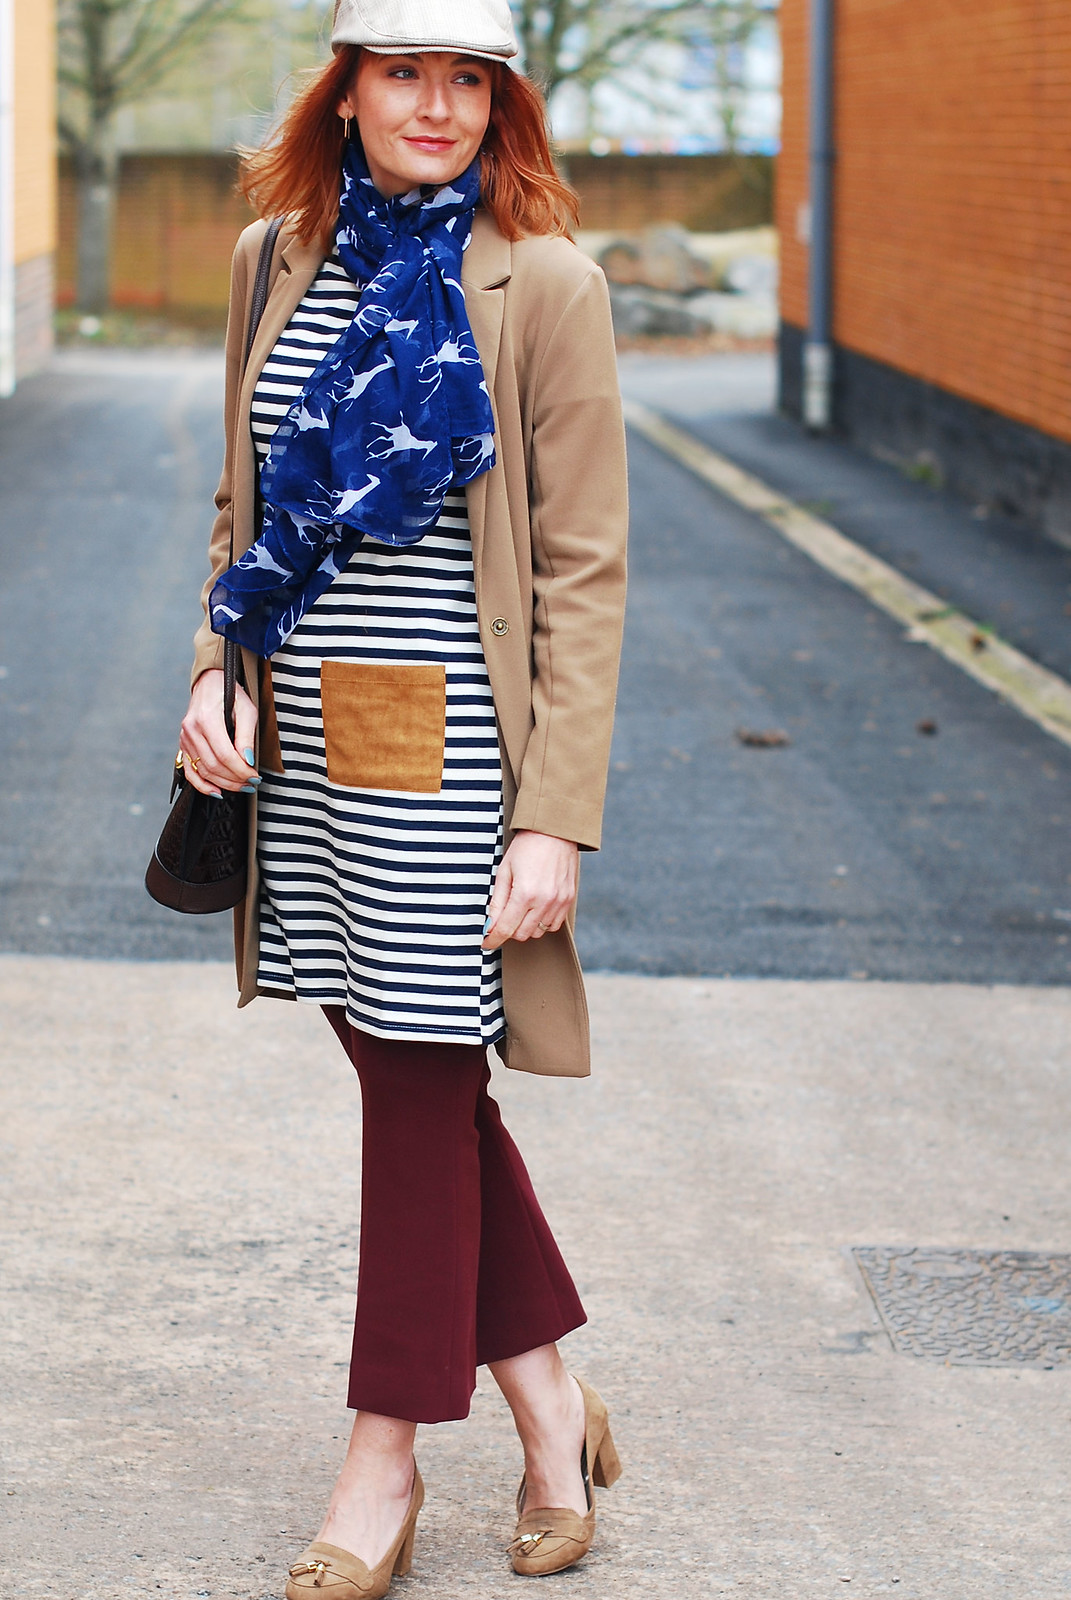 Styling a preppy stripe summer dress in autumn/winter: Camel longline blazer stripe tunic dress with patch pockets kick flare burgundy trousers heeled loafers crossbody bag stone flatcap for women | Not Dressed As Lamb, over 40 style